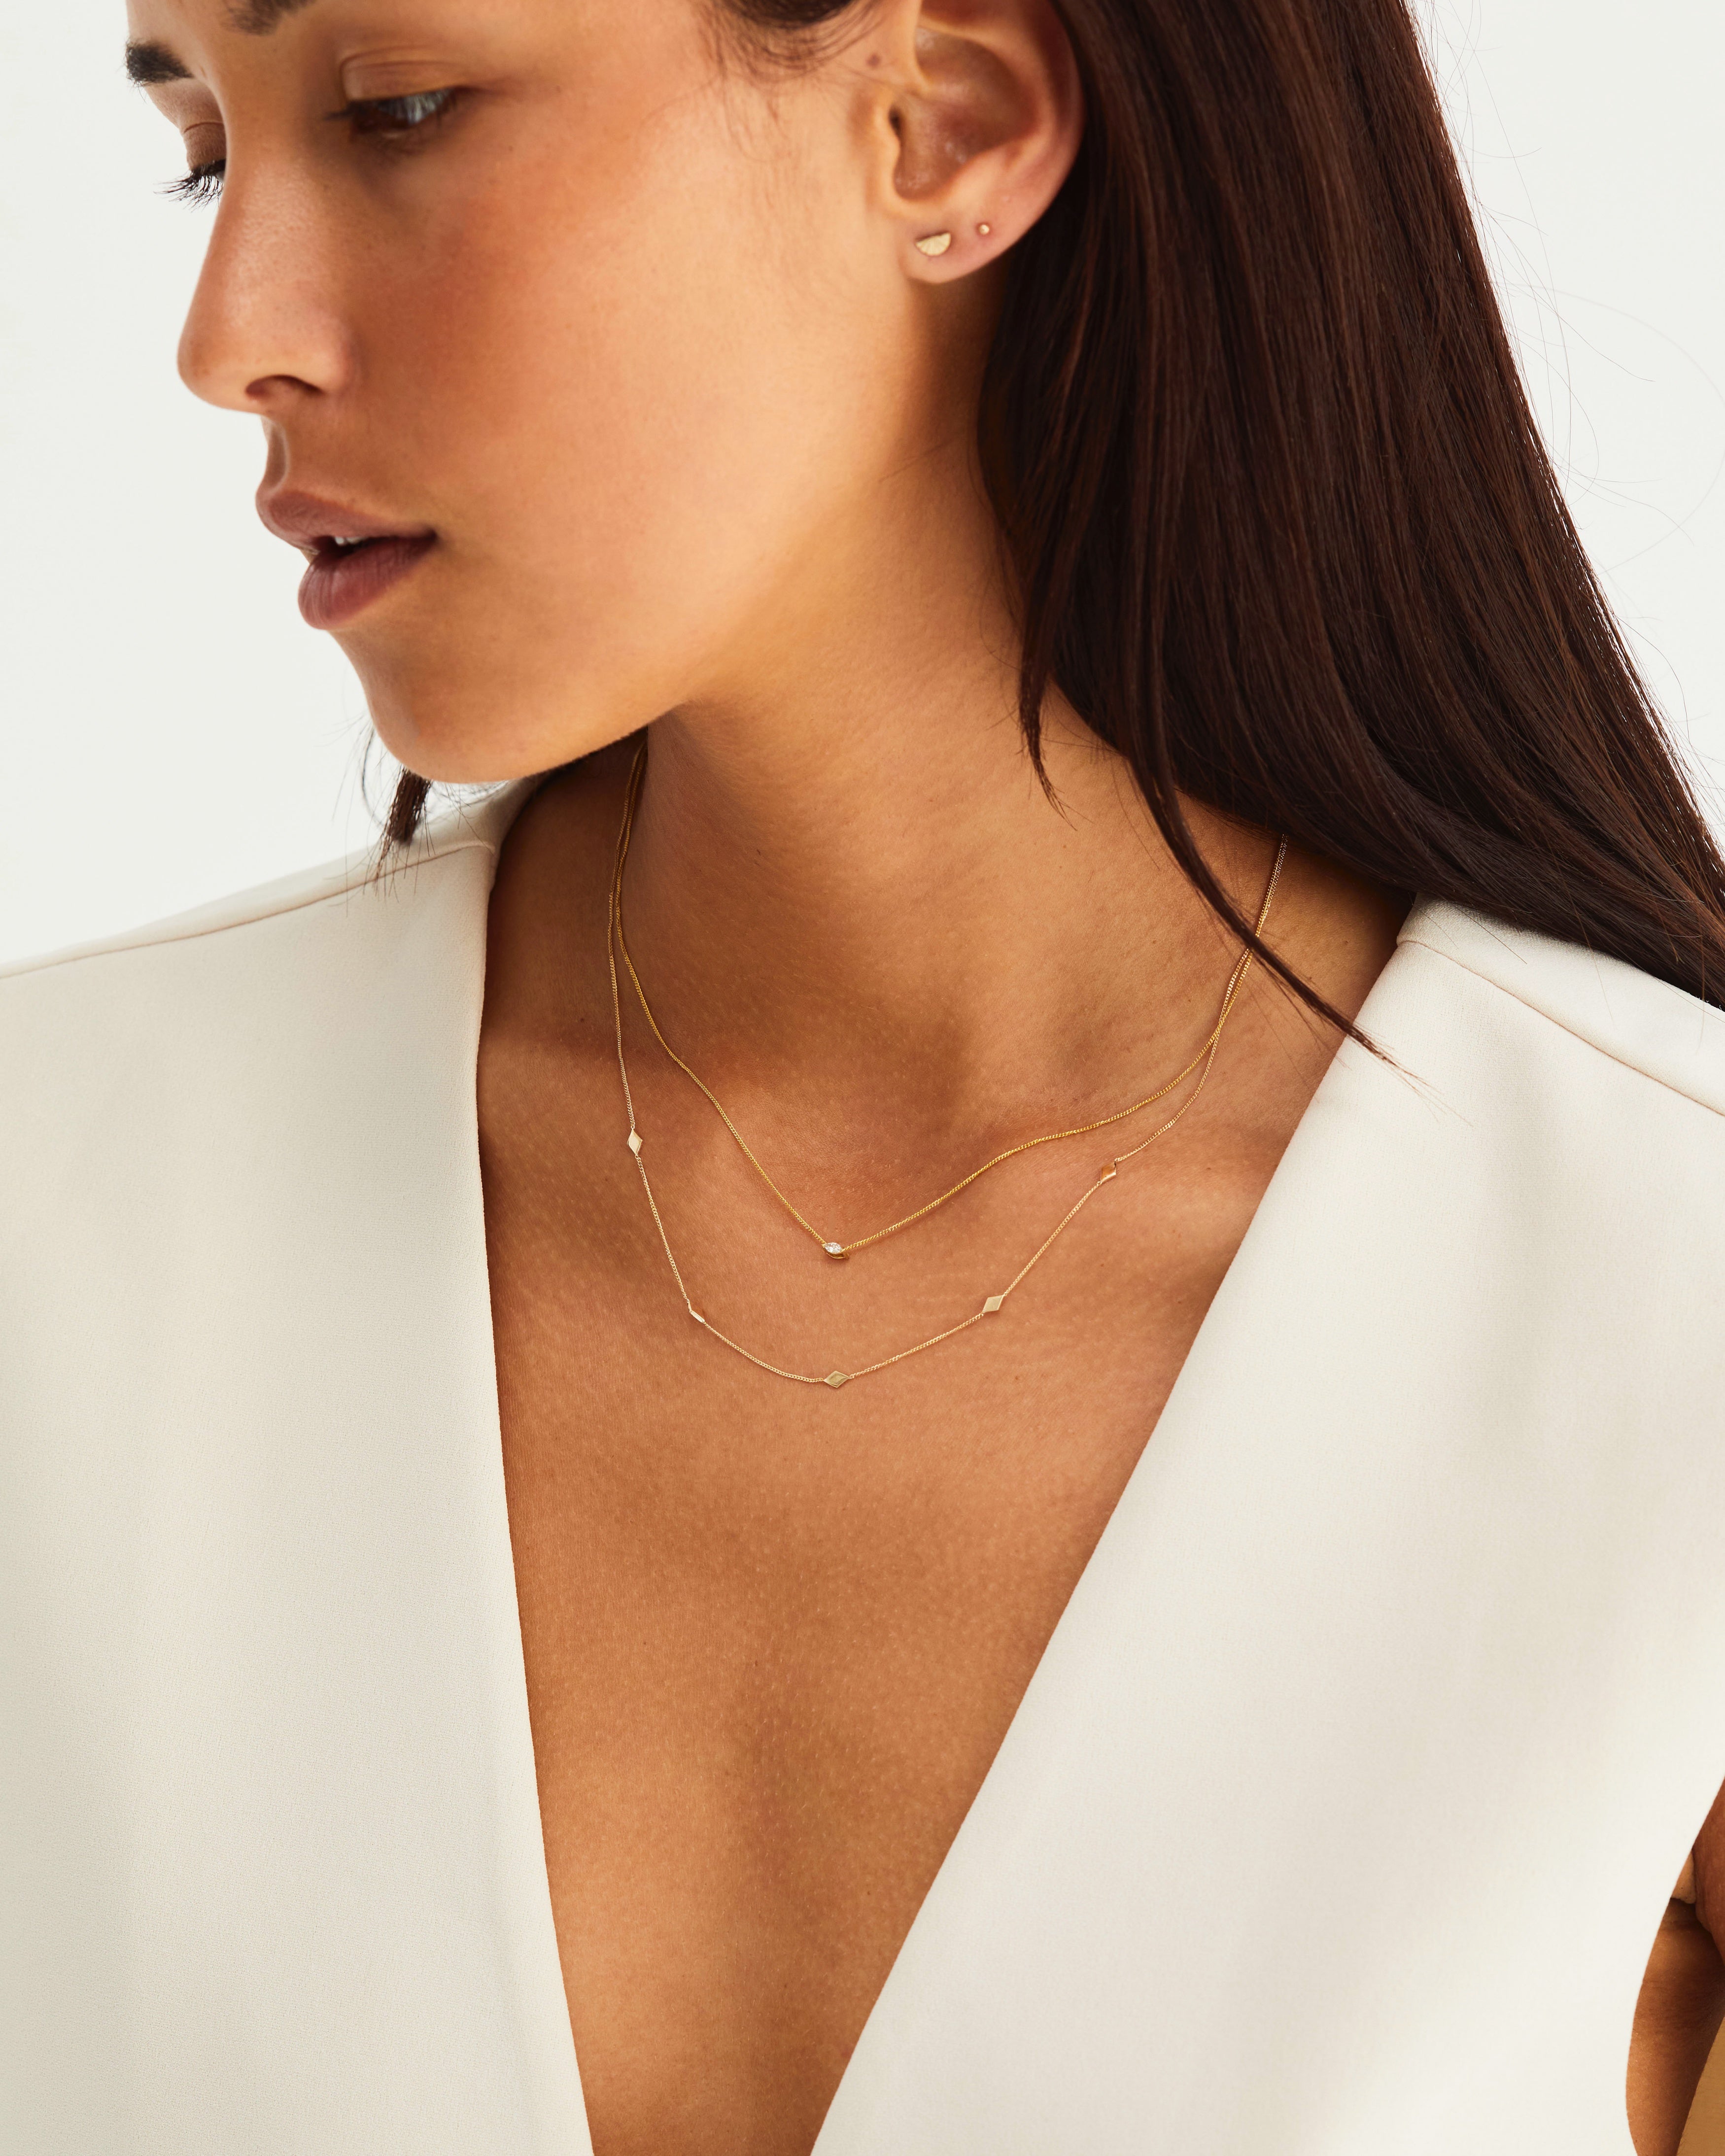 A woman waering the Nuna Charm Necklace in yellow gold.